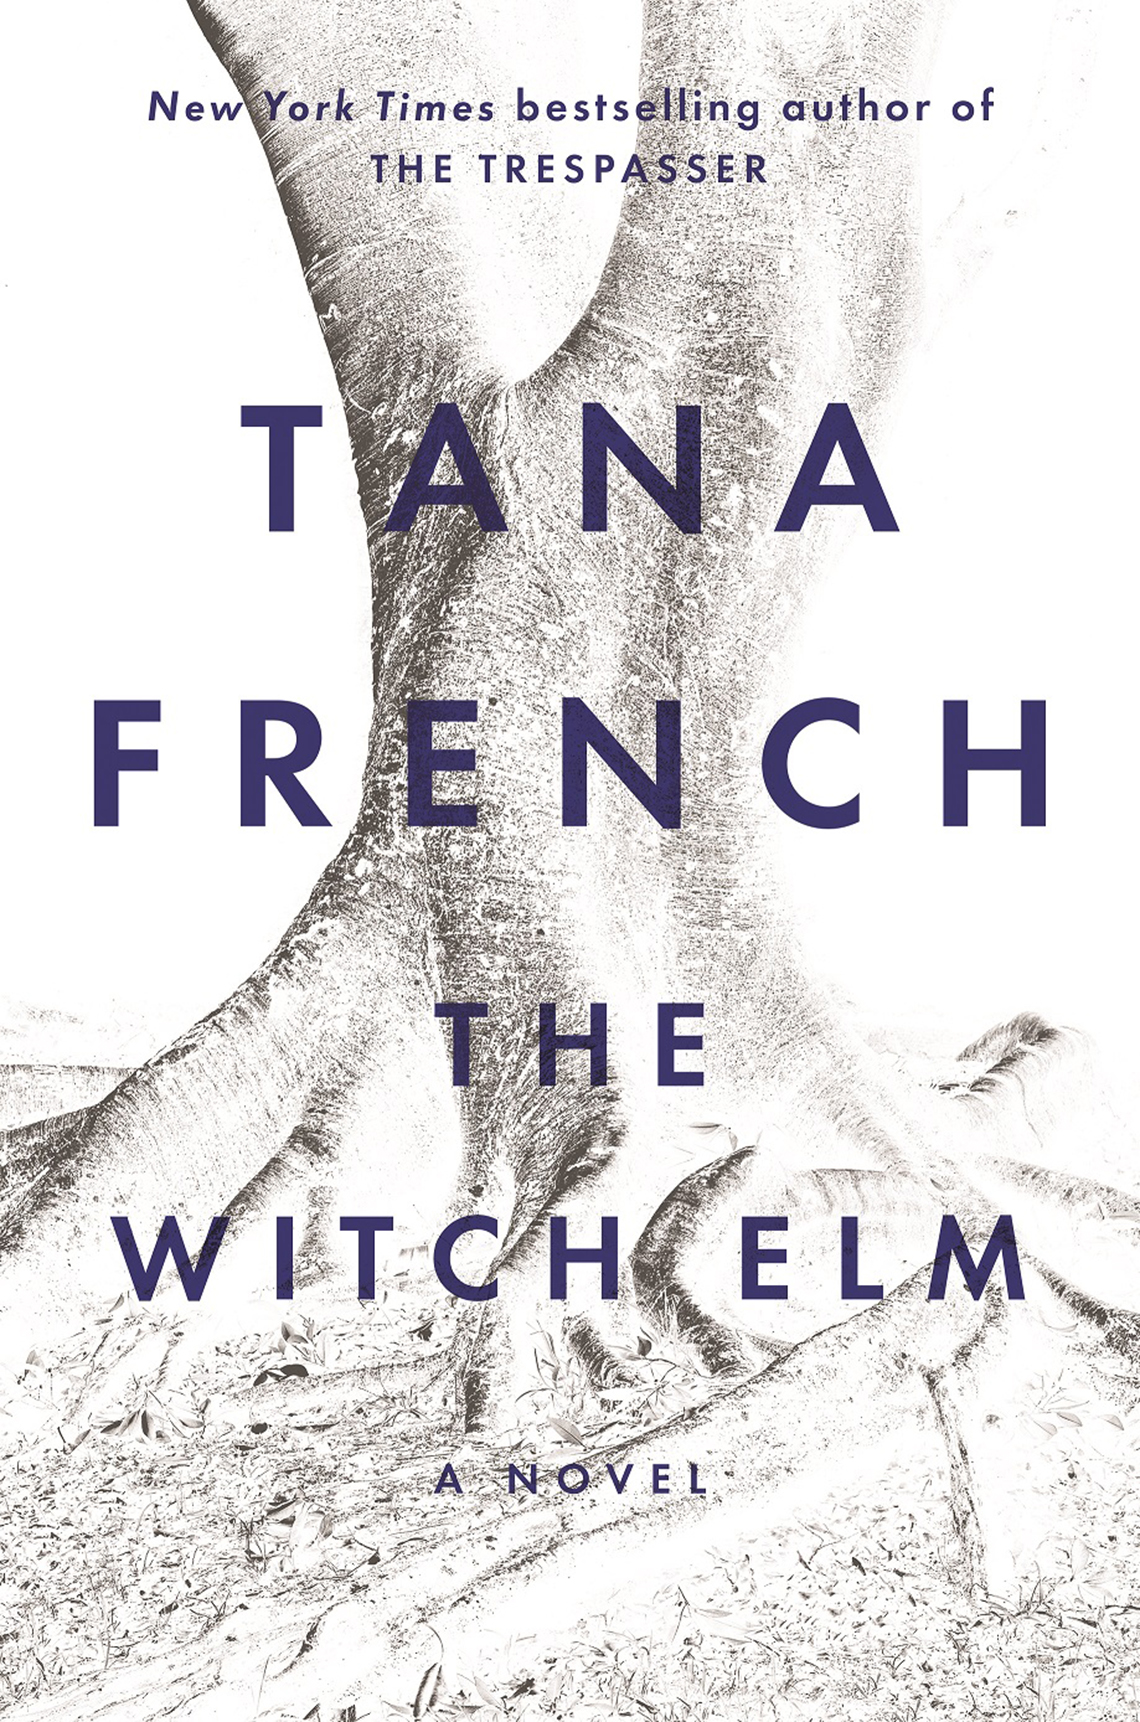 Book cover reads "New York Times bestselling author of The Trespasser, Tana French, The Witch Elm, a novel.